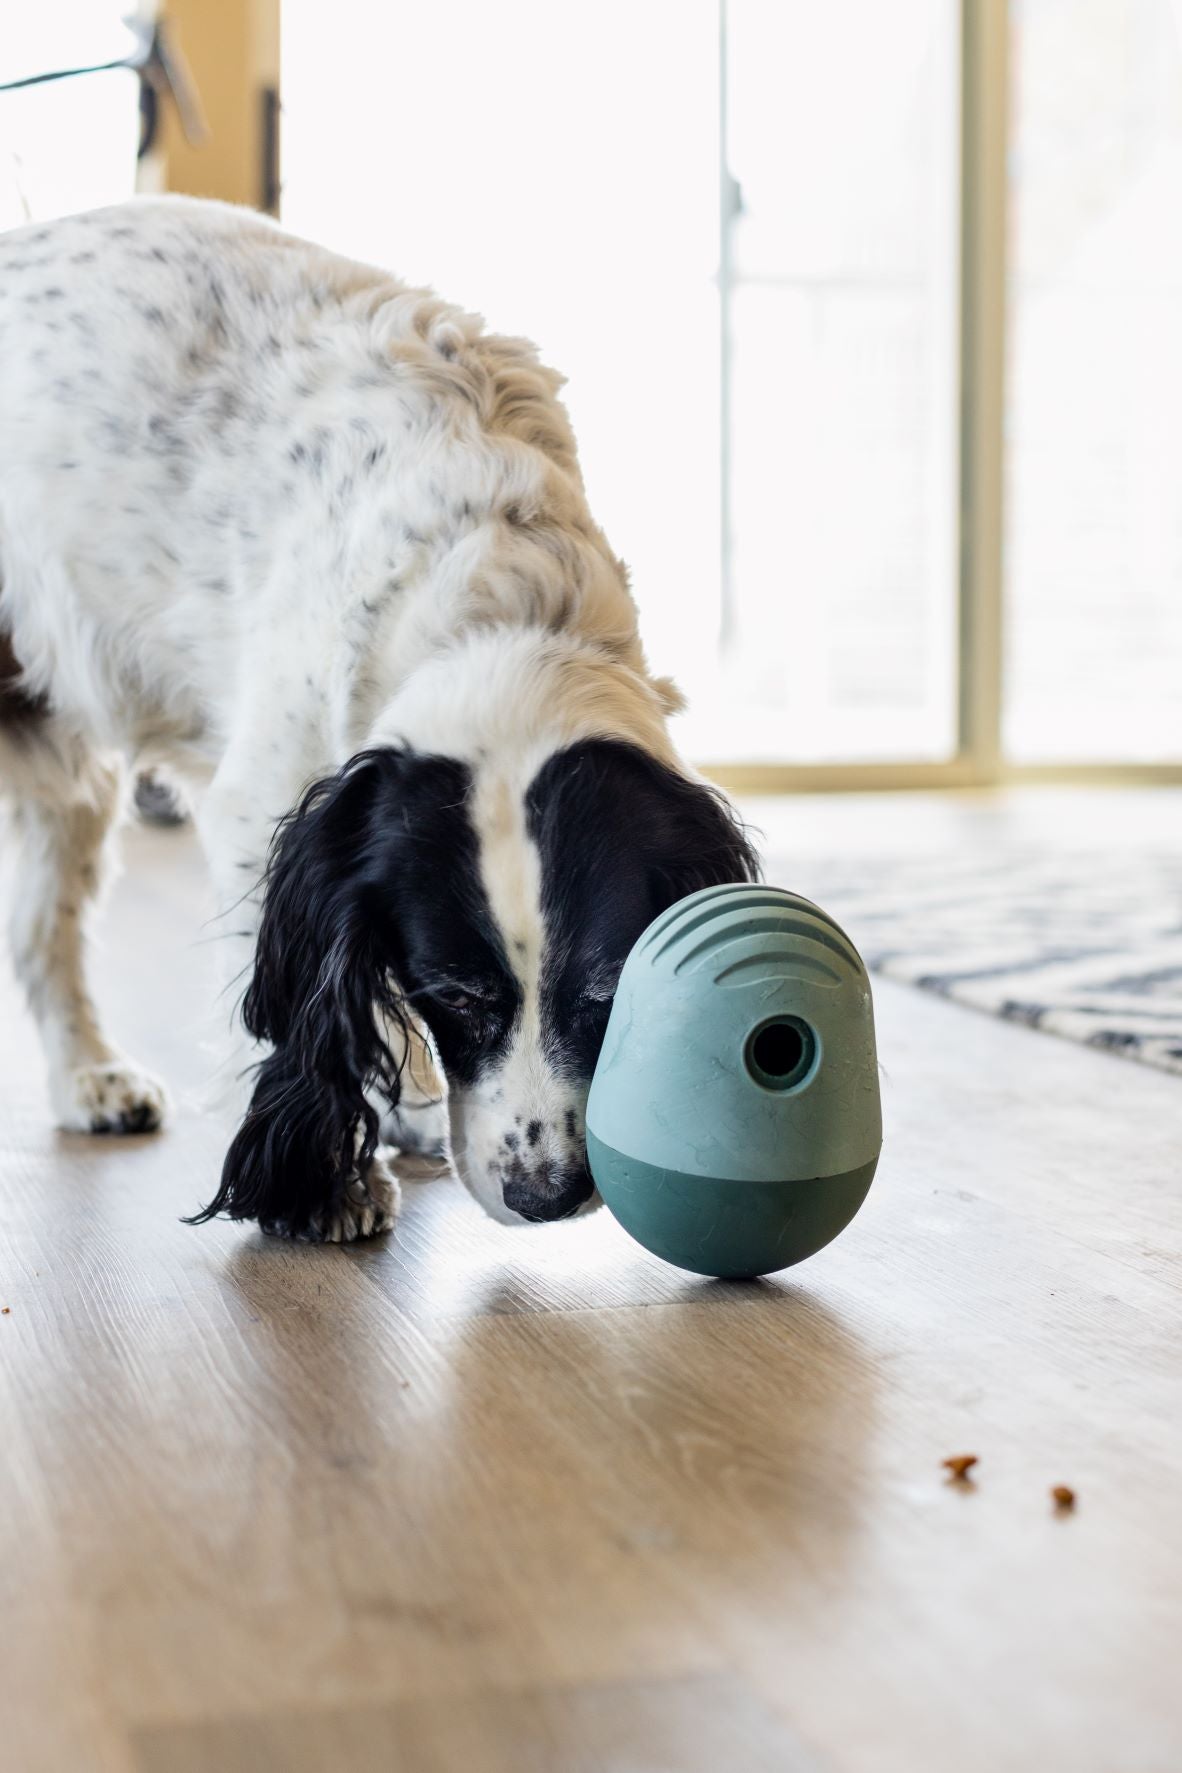 Fable Pets dog toy review: We test the game and the falcon toy